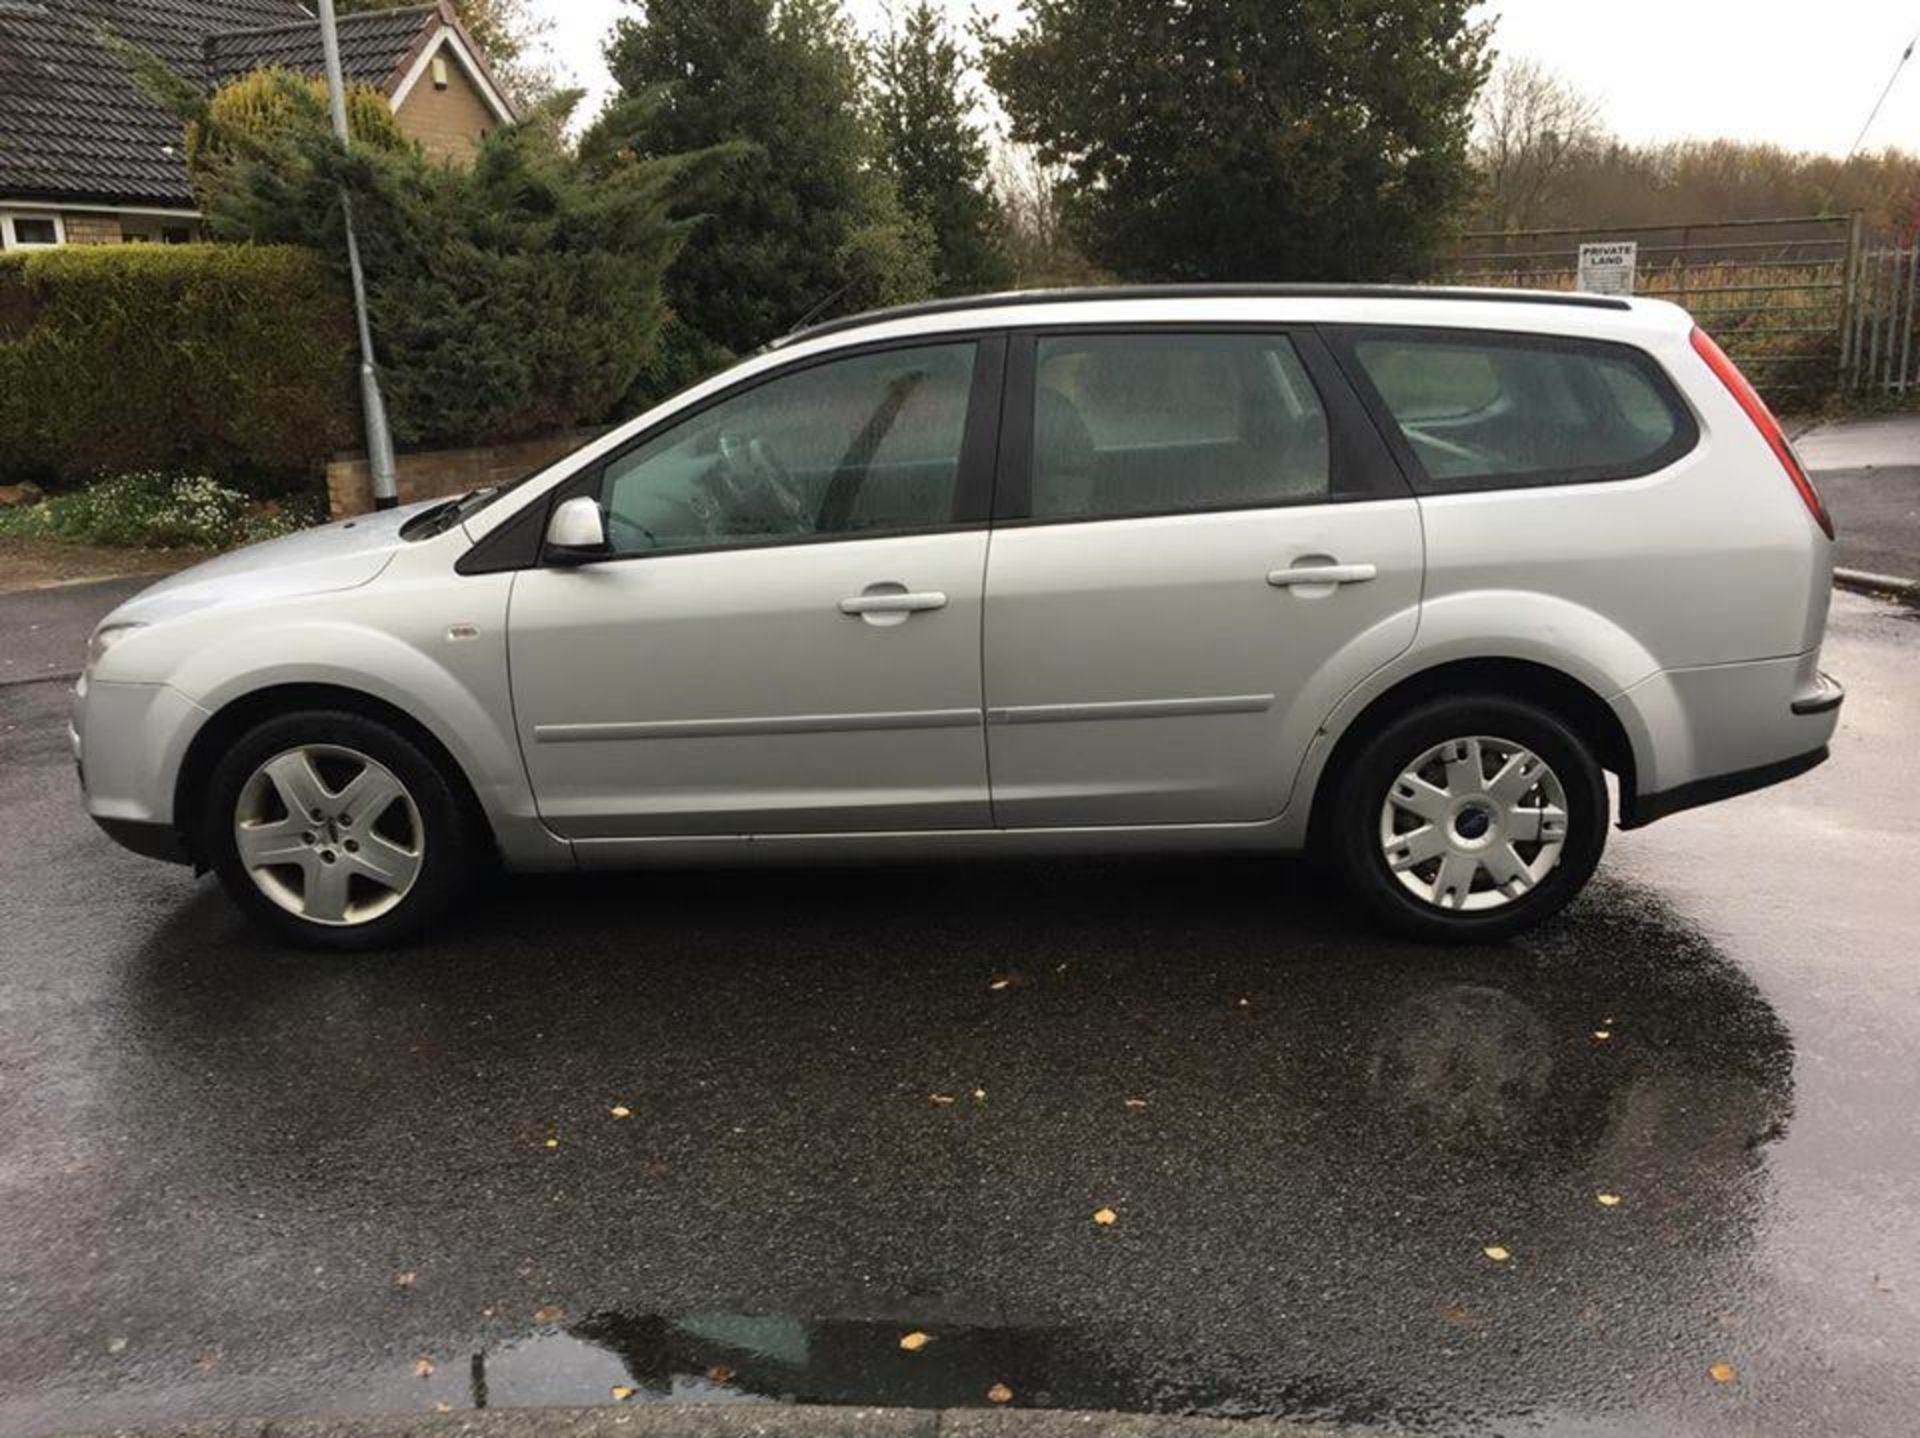 2008/57 PLATE FORD FOCUS 1.6 PETROL STYLE ESTATE, 91K MILES. MOT JULY 2017. - Image 11 of 12